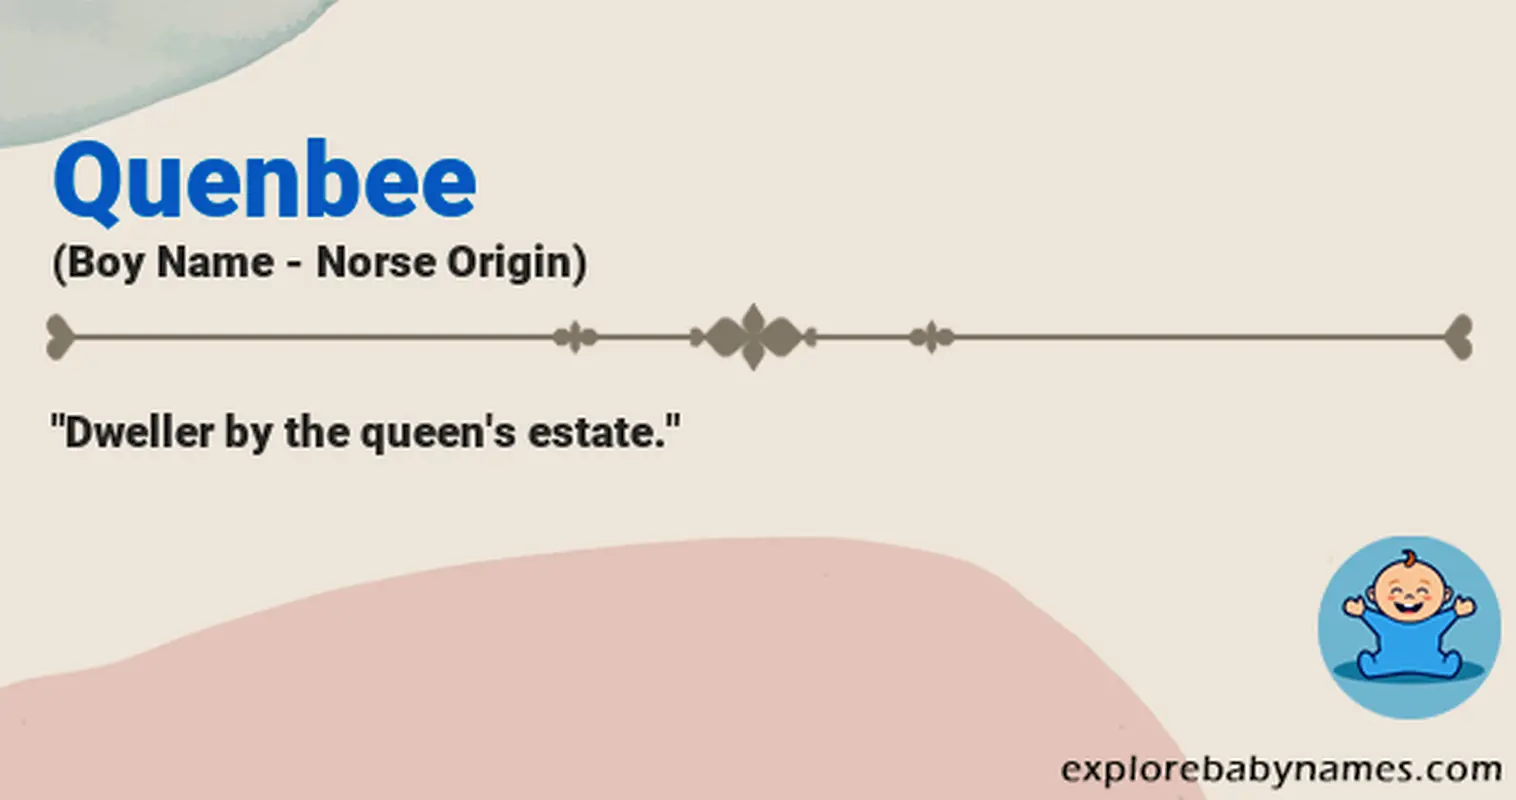 Meaning of Quenbee